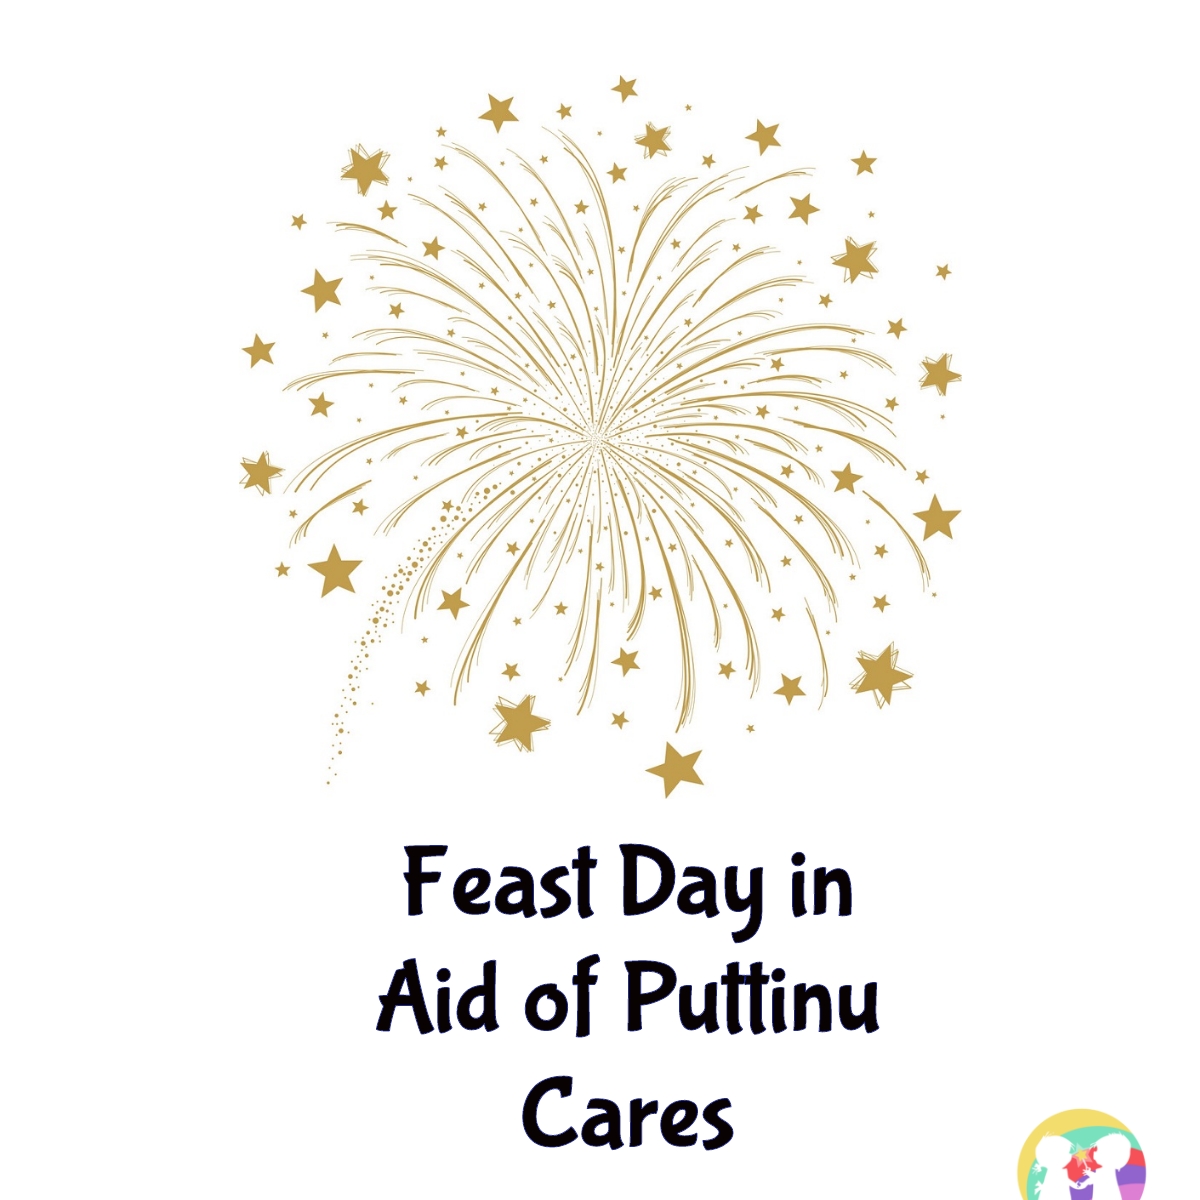 Feast Day in Aid of Puttinu Cares- Wednesday 22nd June